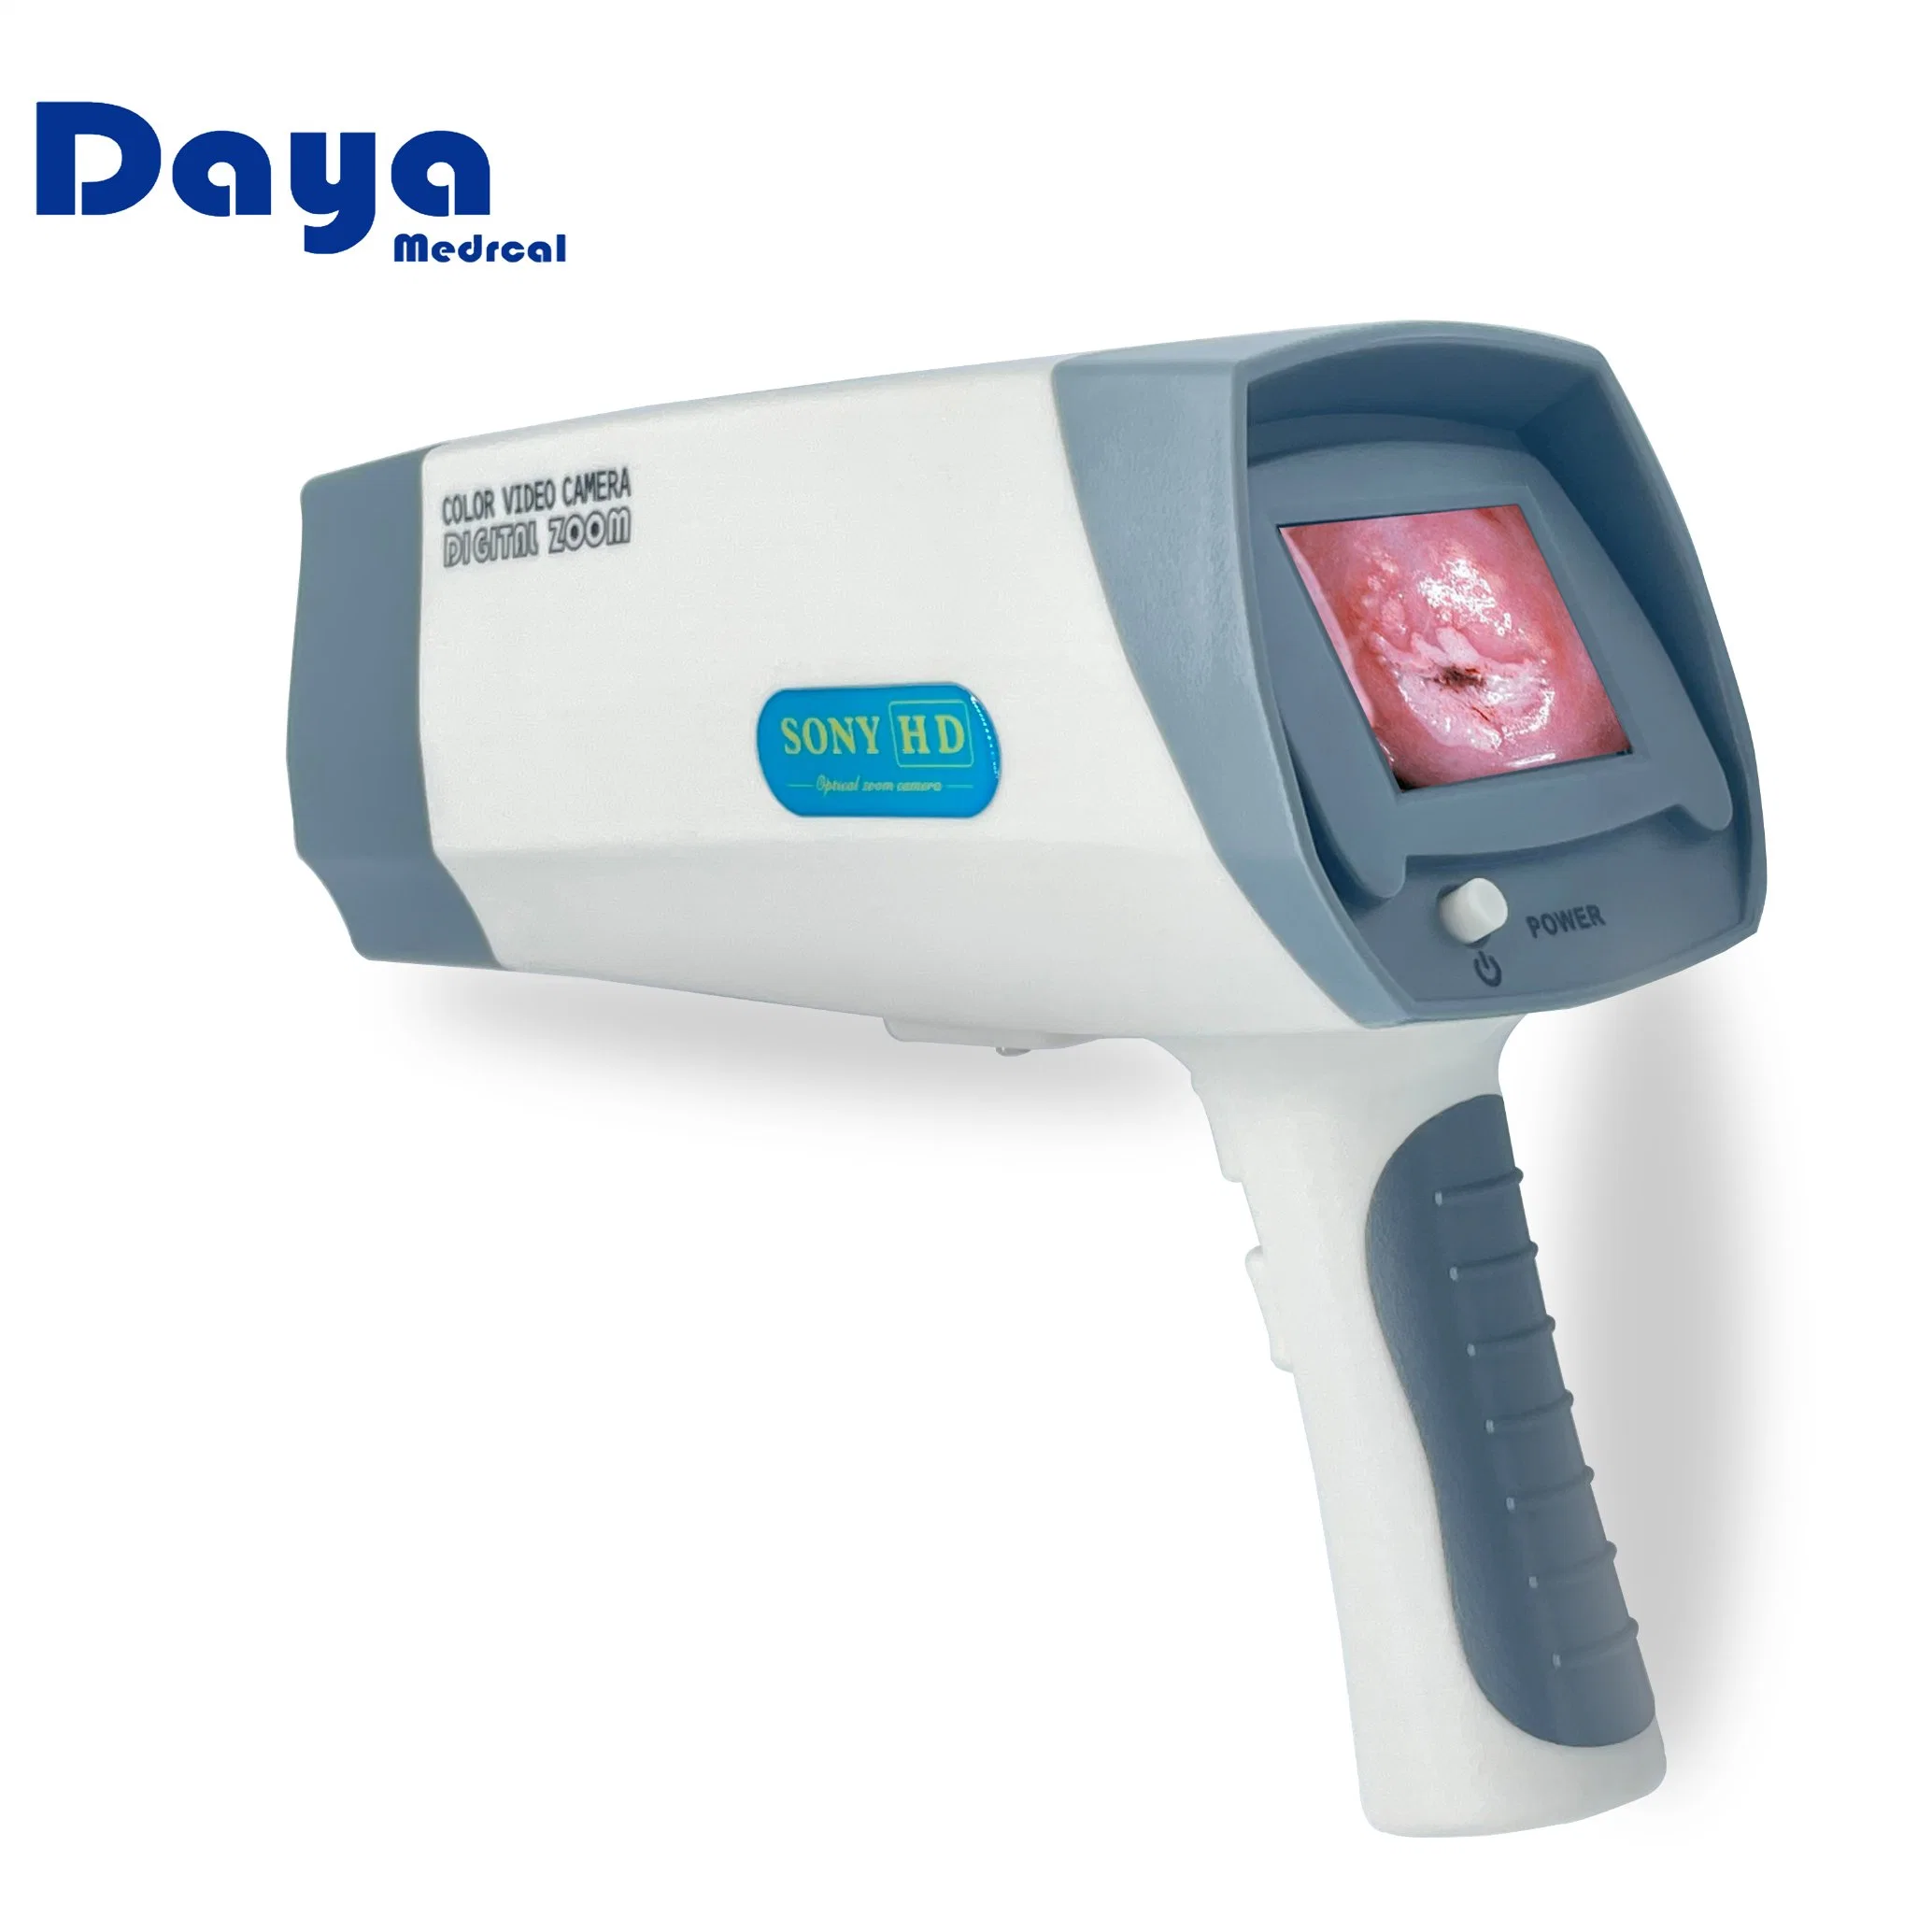 Medical Colposcope Equipment for Gynecology Examination